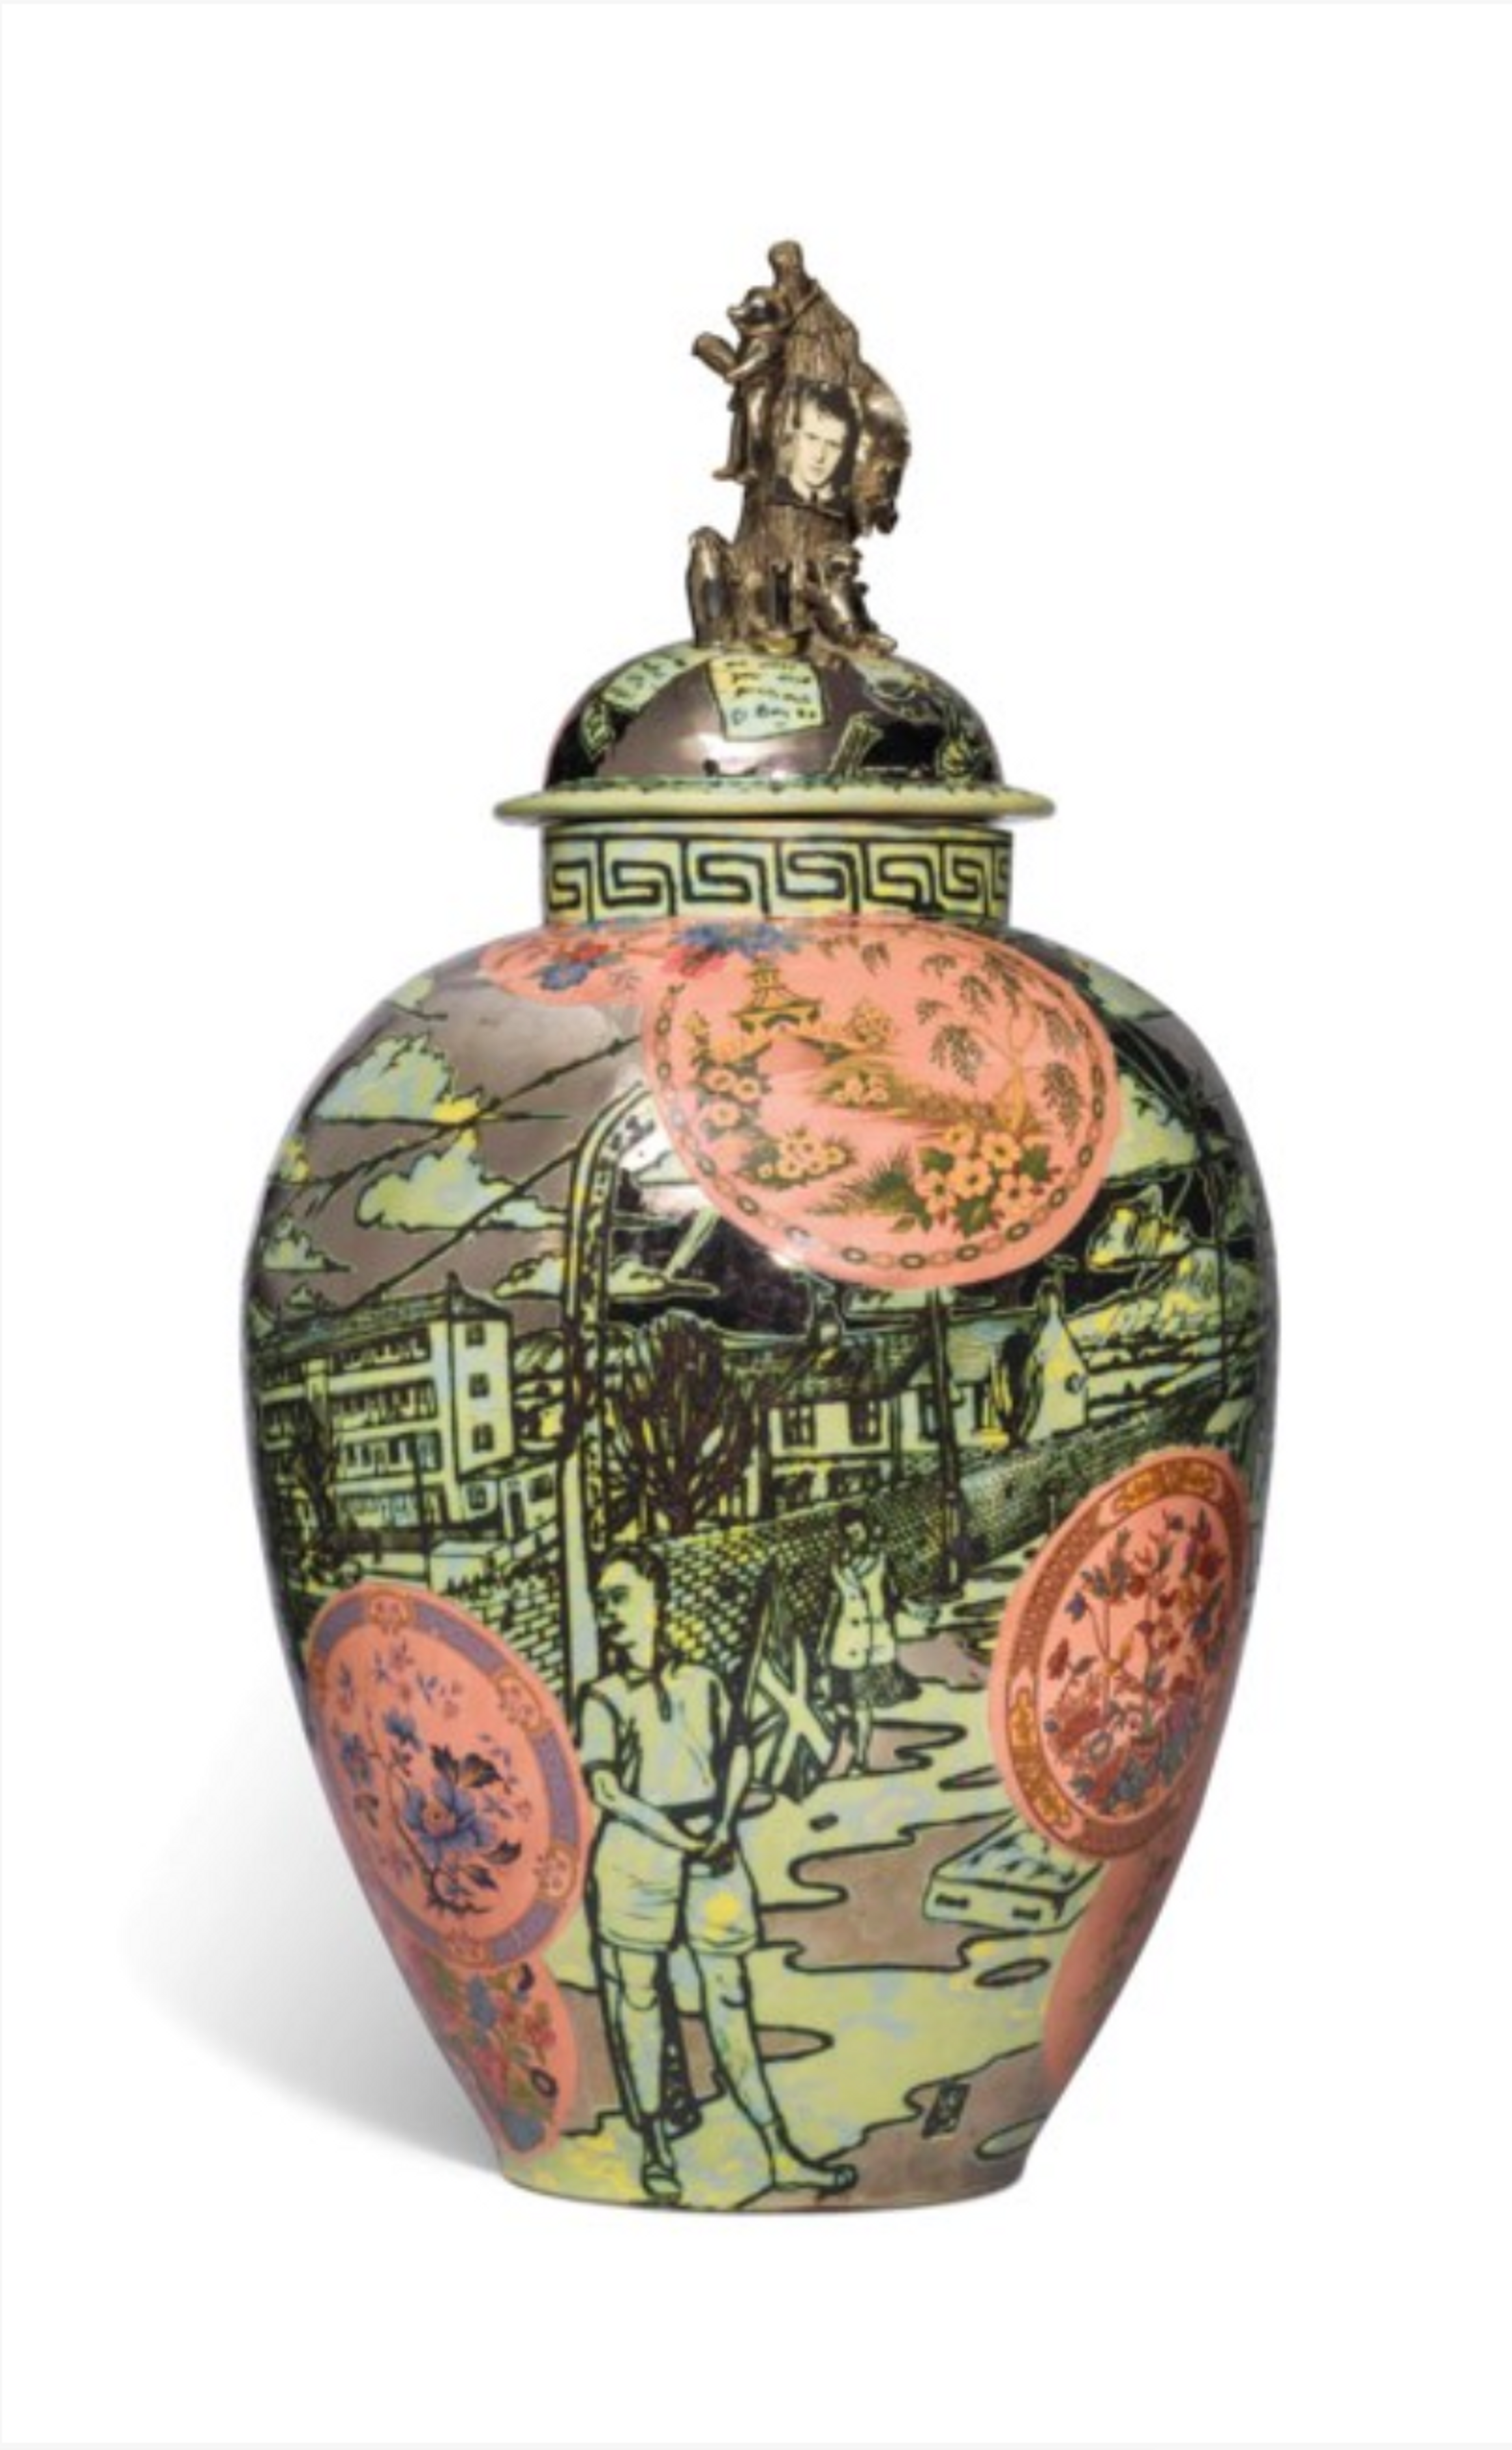 Barbaric Splendour by Grayson Perry